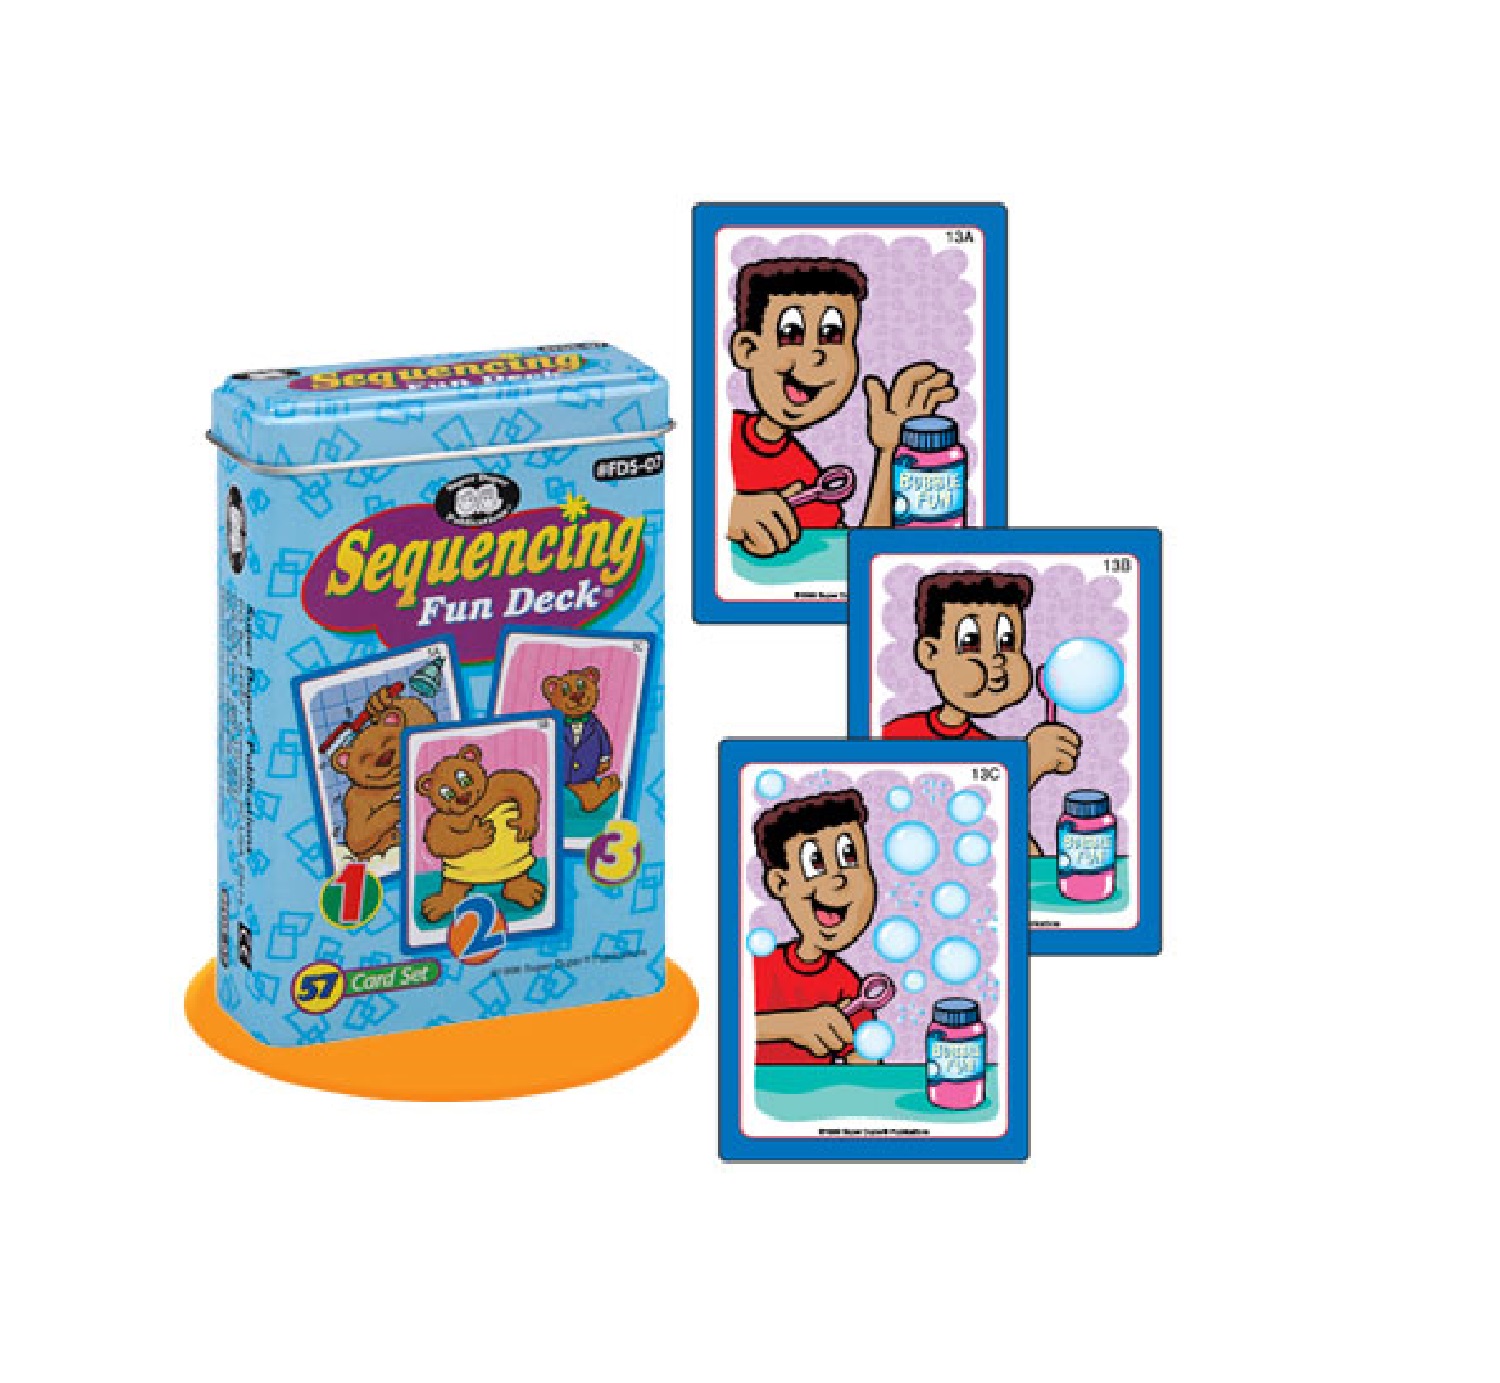 Super Duper Publications Synonyms Fun Deck Flash Cards Educational Learning  Resource For Children 